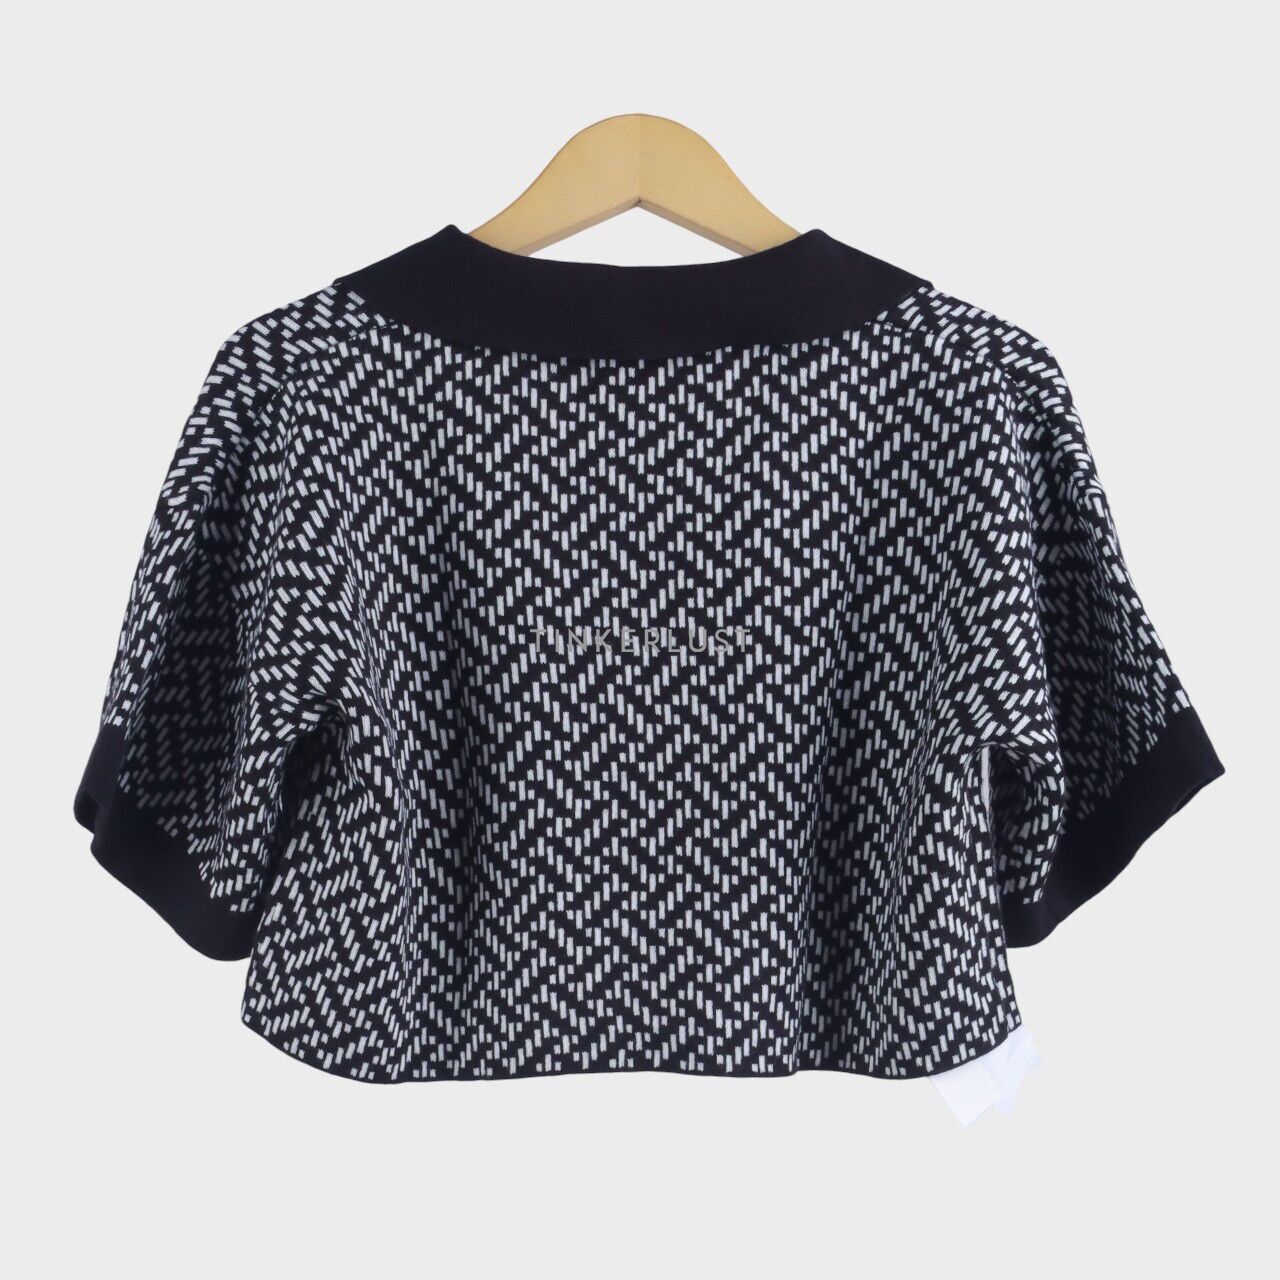 love-and-flair Black & White Pattern Blouse